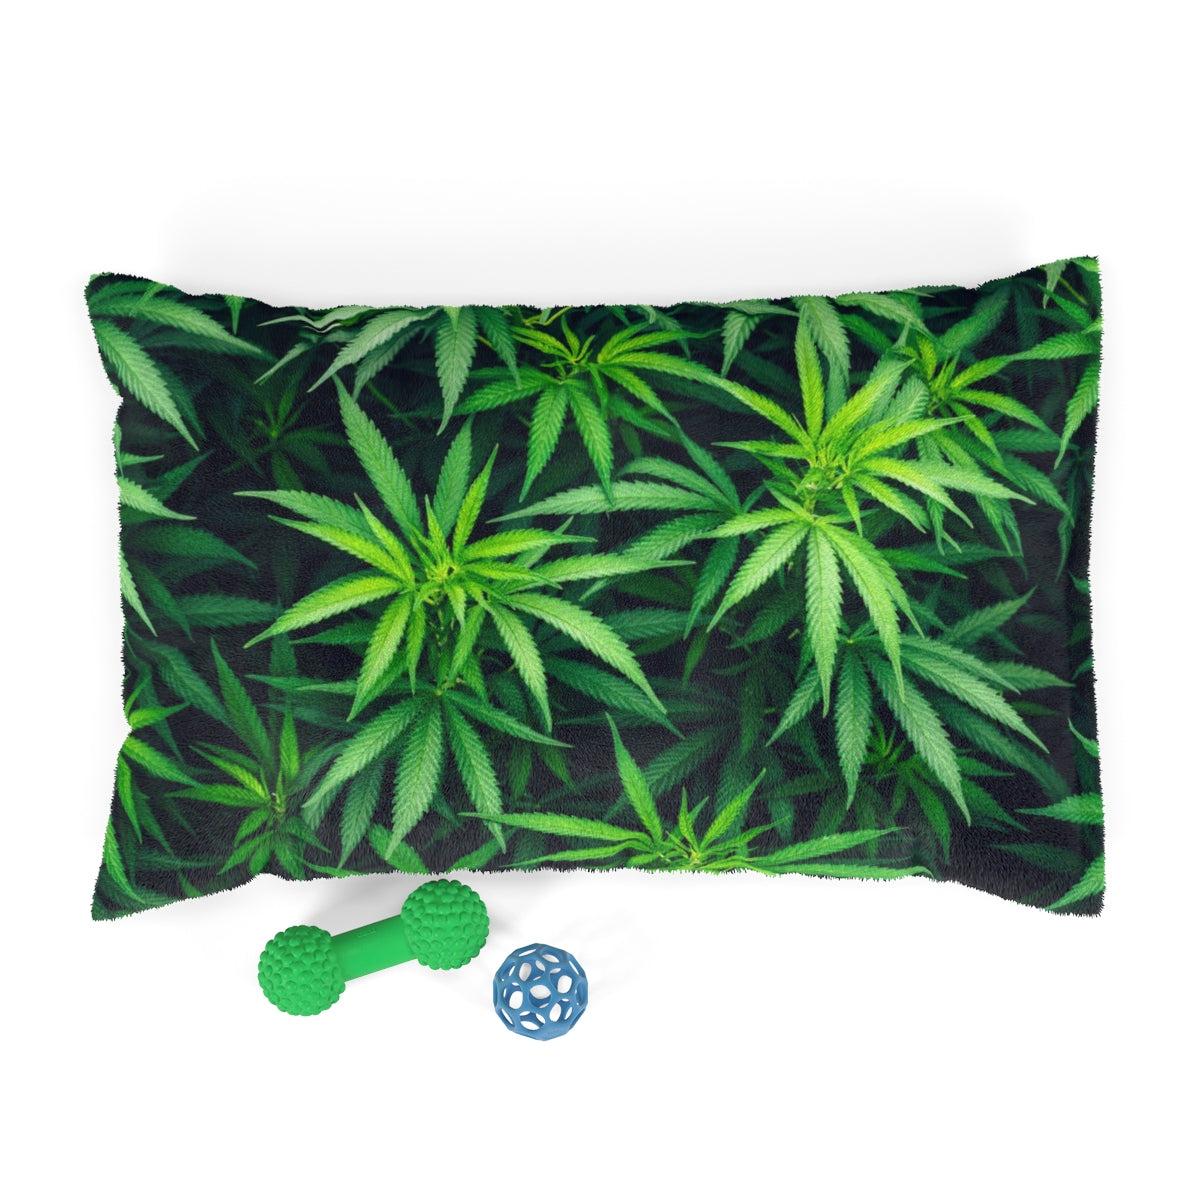 My Cannabis Pet Bed